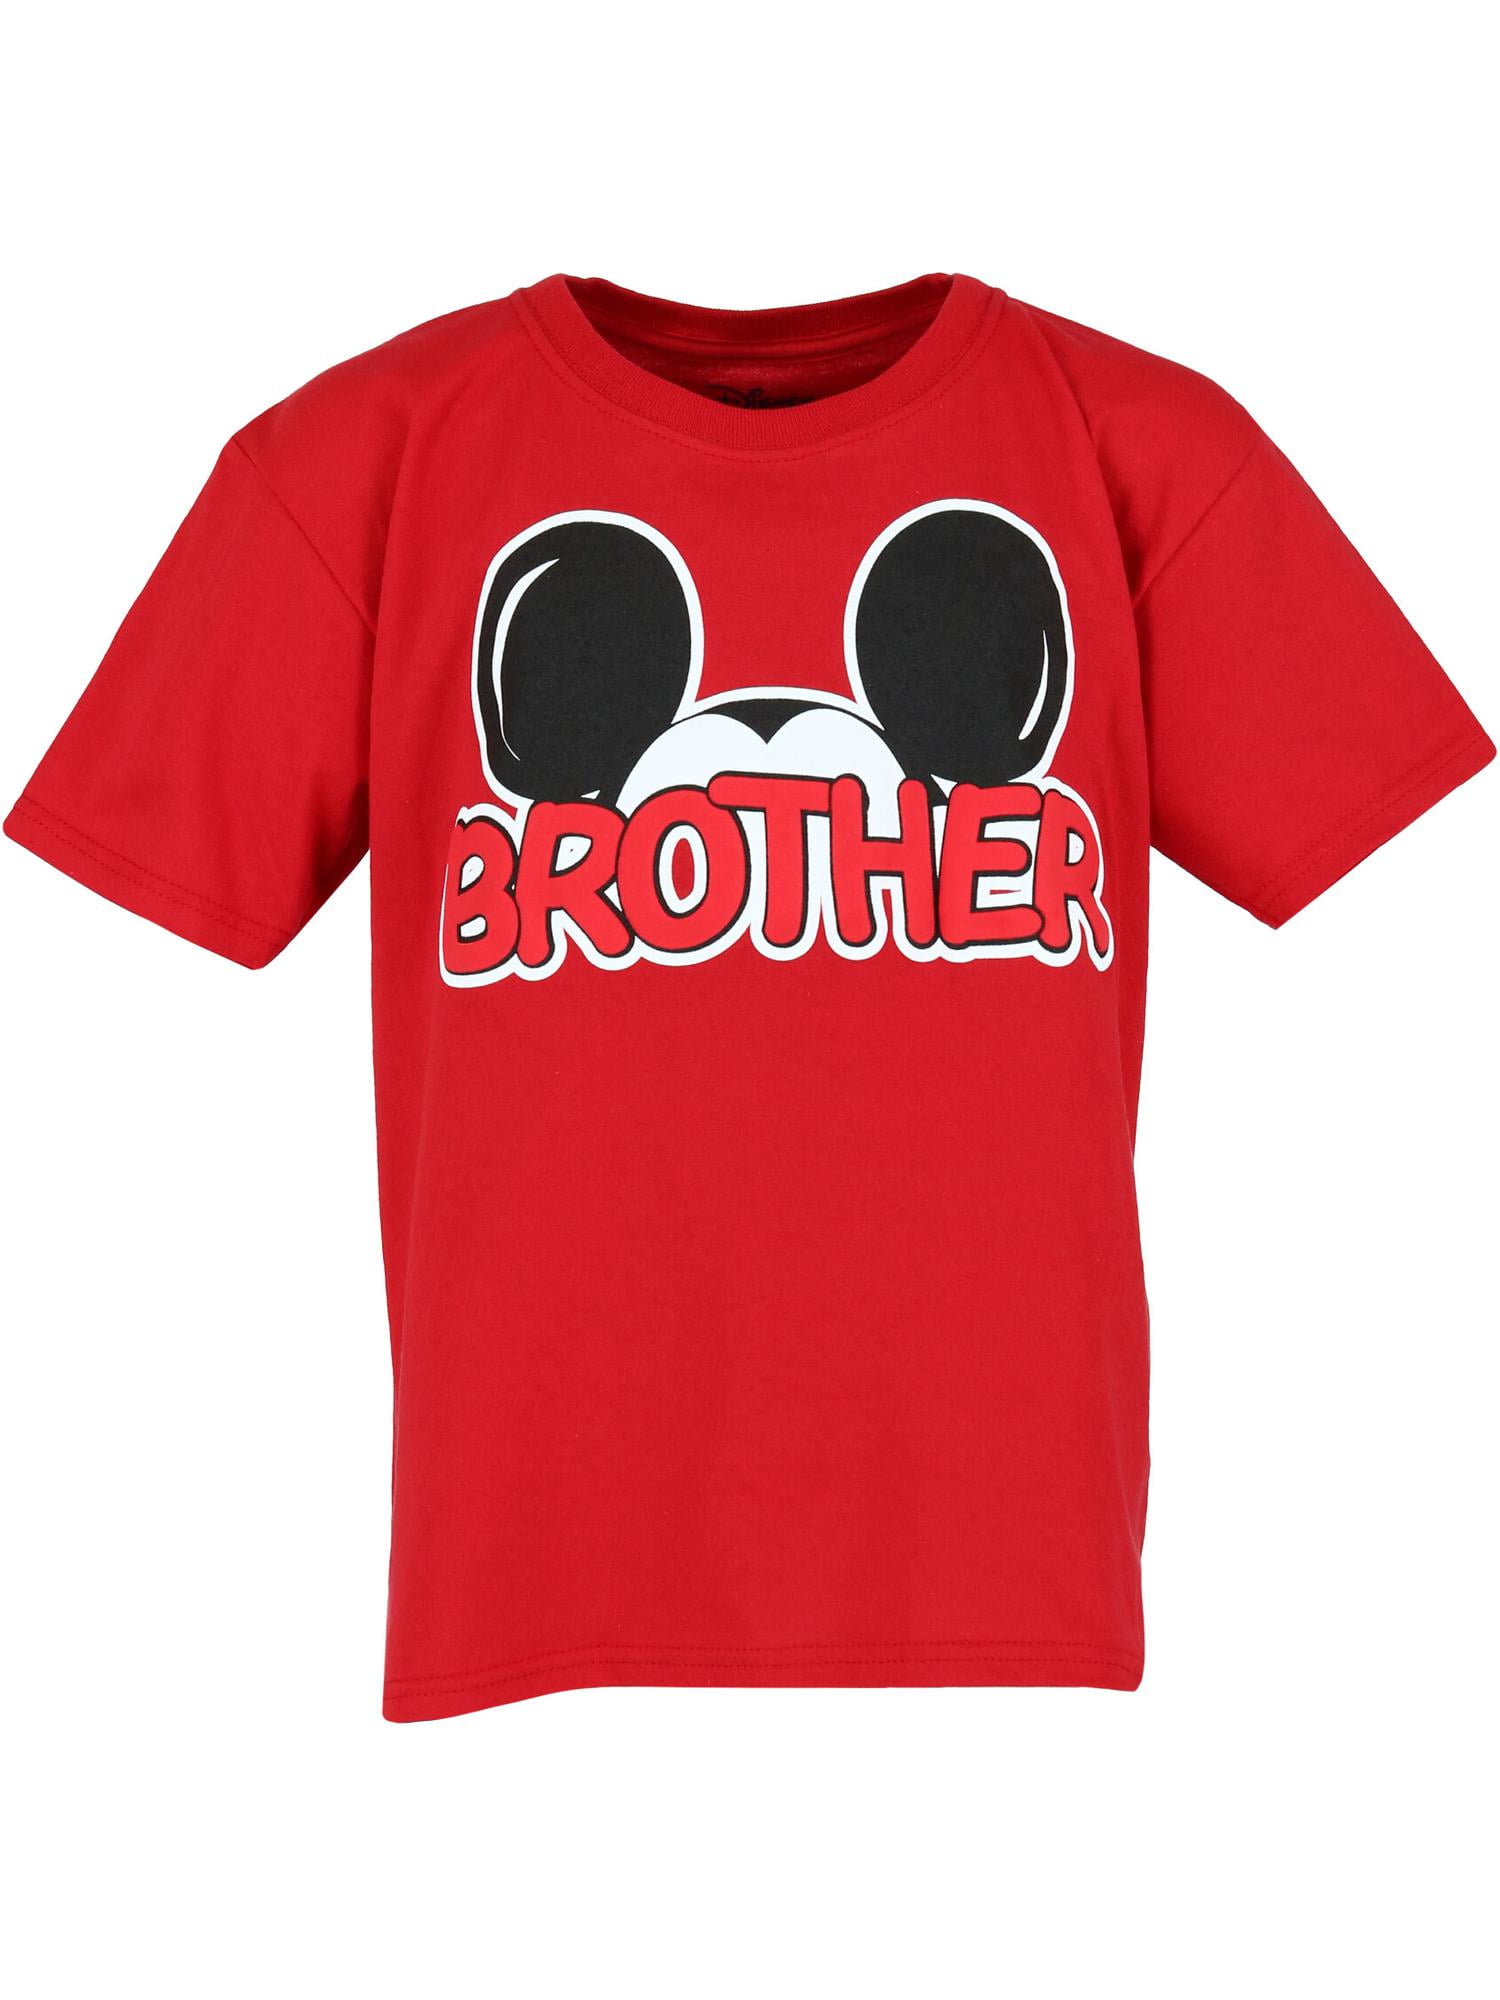 Patriotic T-shirt Funny Boys Shirt Brothers T-shirt Baby Announcement Funny Brothers Shirt BROS BEFORE BOWS Baby Shower Bodysuit